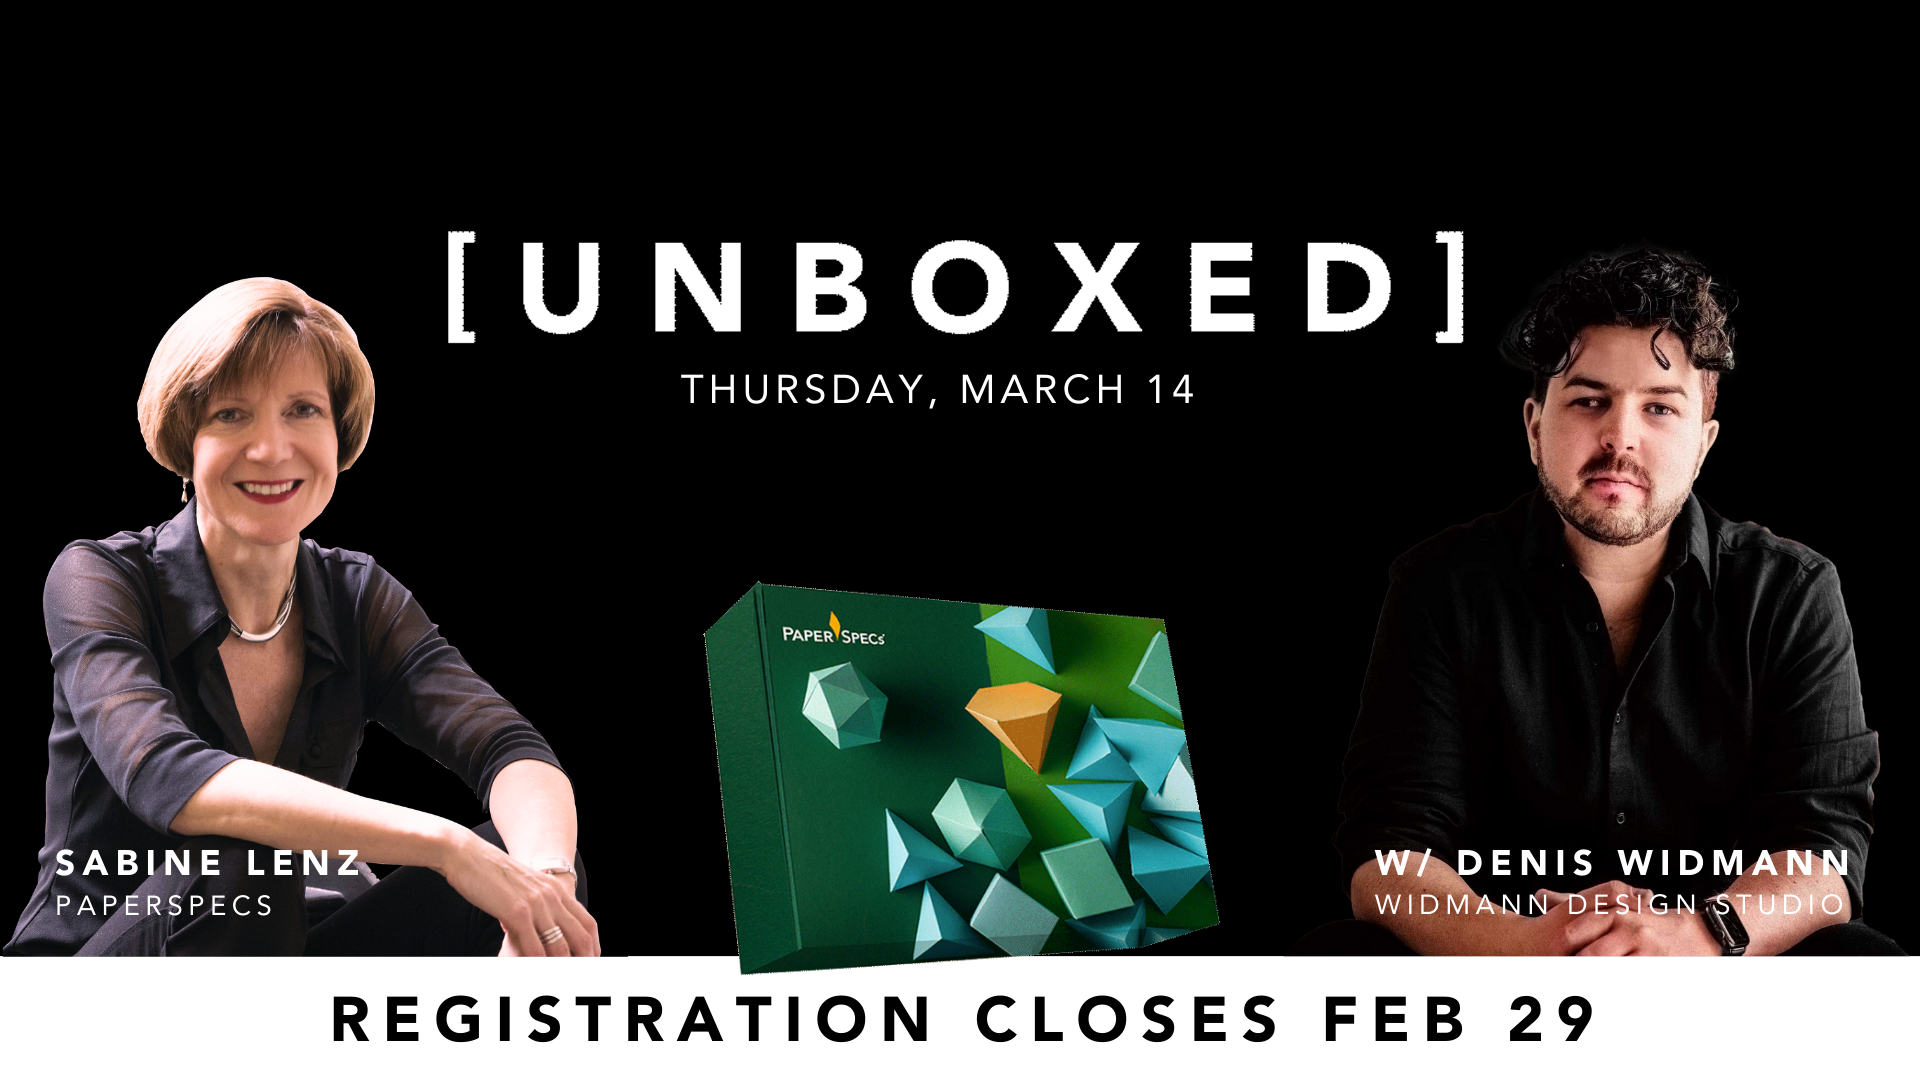 unboxed event with sabine lenz and denis widmann